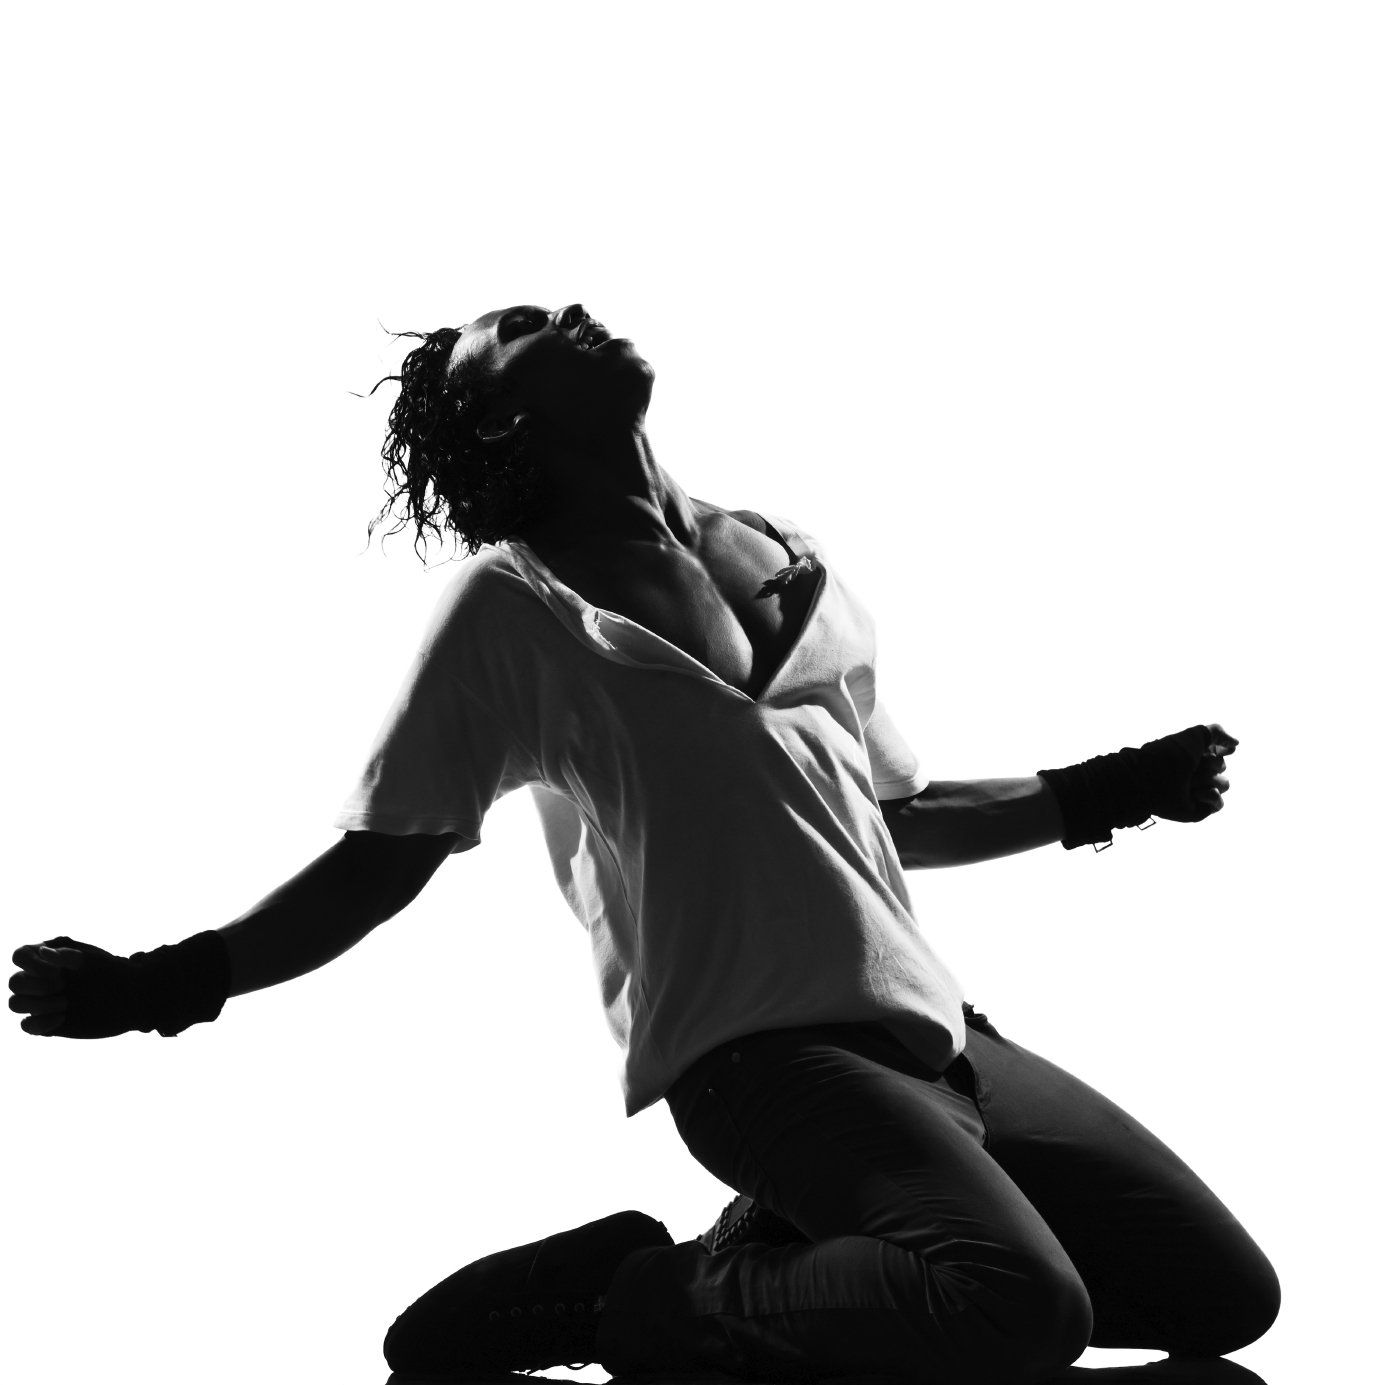 Black and white silhouette of a man dancing on his knees